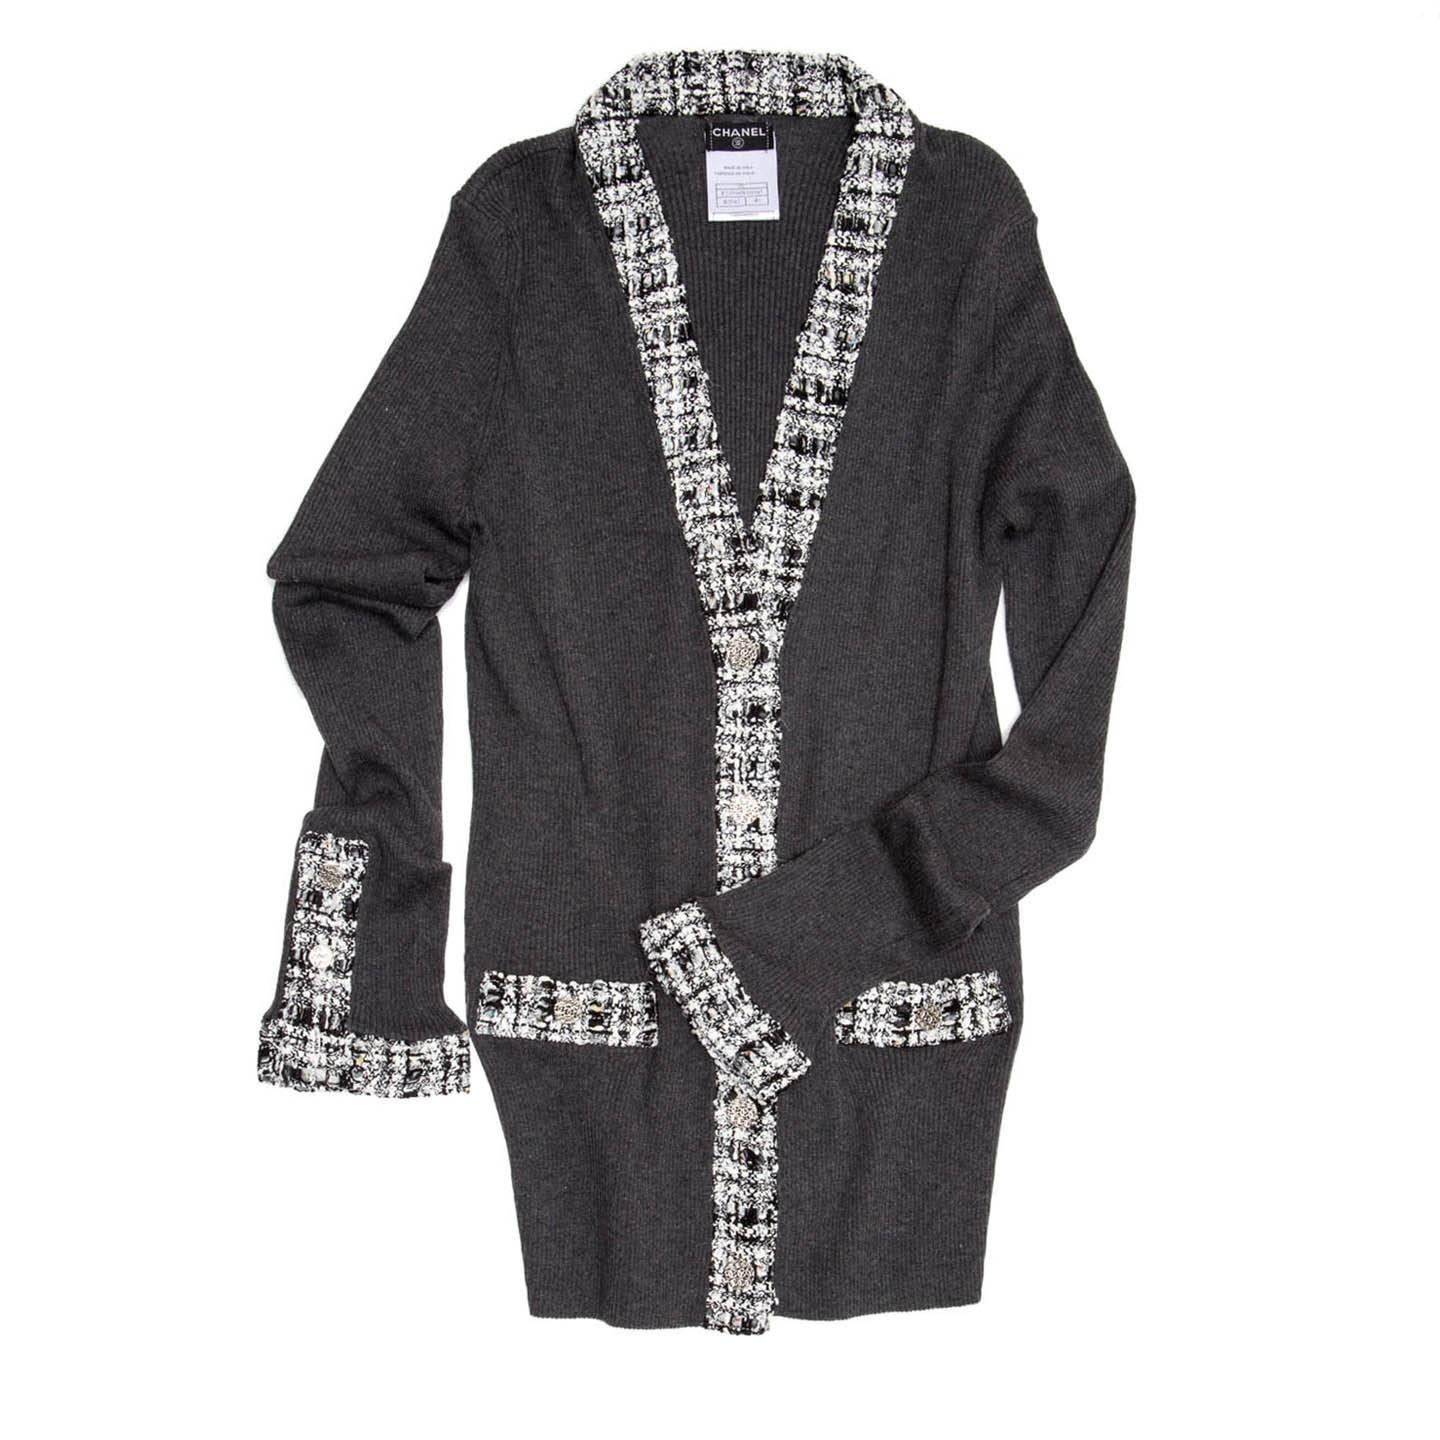 Grey cotton ribbed knit cardigan with black & white tweed inserts at V-neck, button flaps, cuffs and pocket. The cuffs have a shirt opening detail with 3 Chanel logo metal buttons to match the ones at center front and pockets. The fit is quite